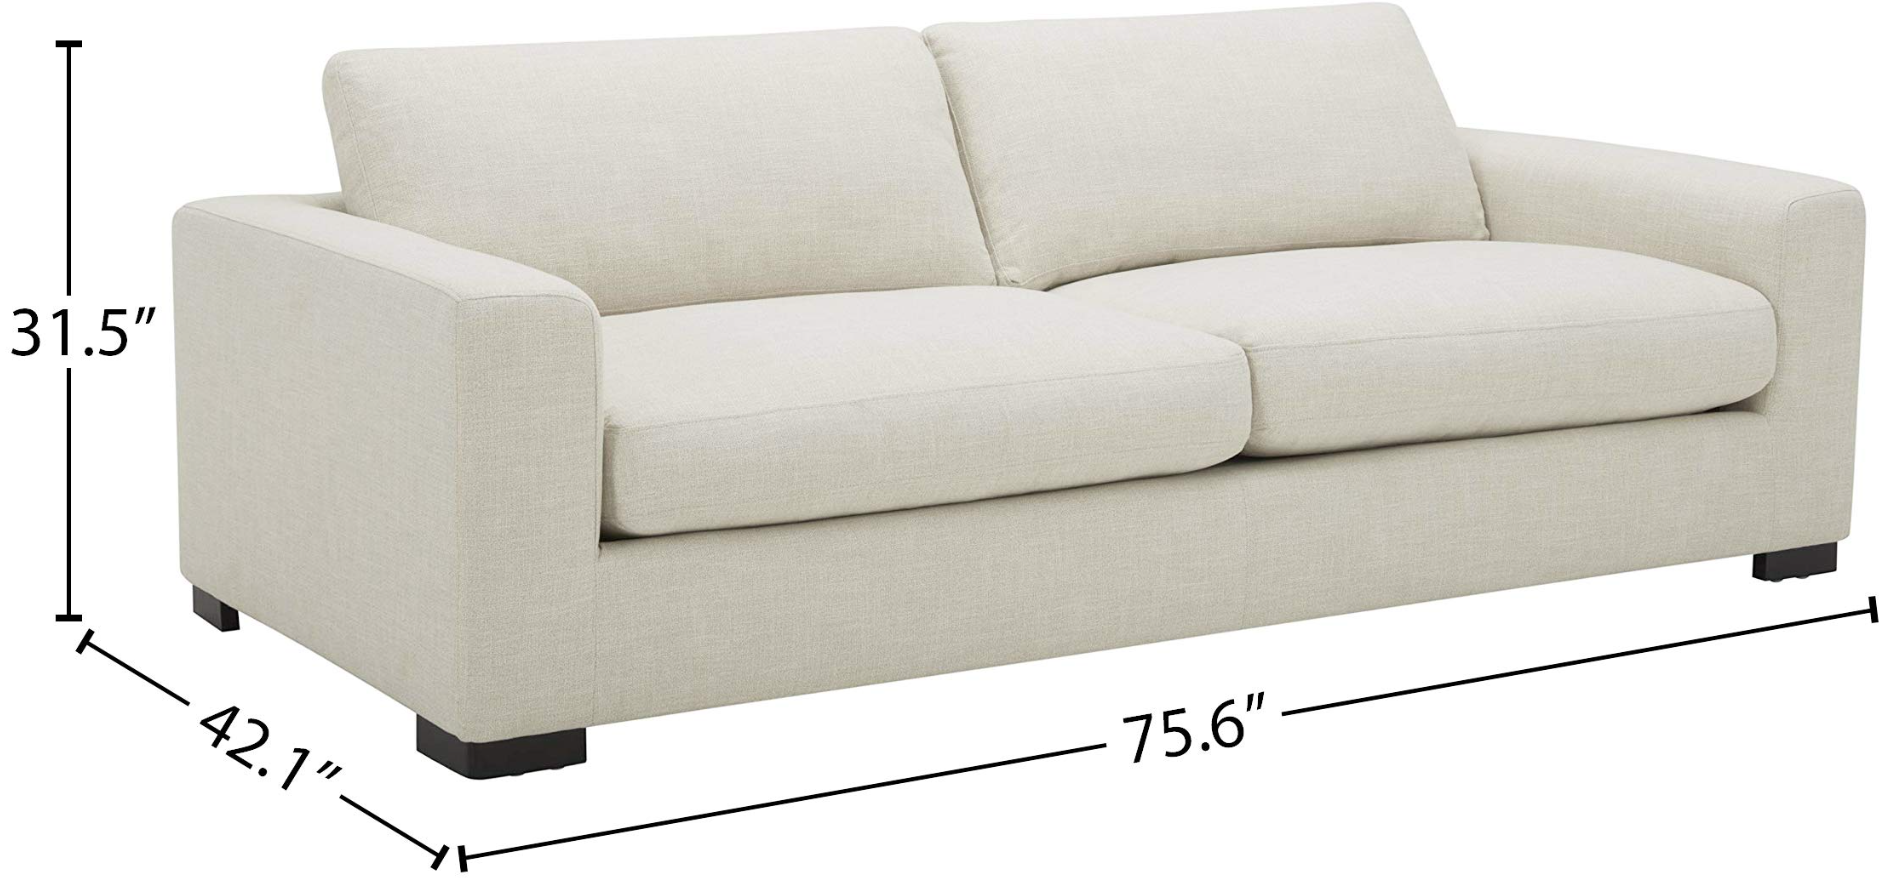 Image of the Stone & Beam Kristin Sofa Couch, a stylish and comfortable seating option for your living room.